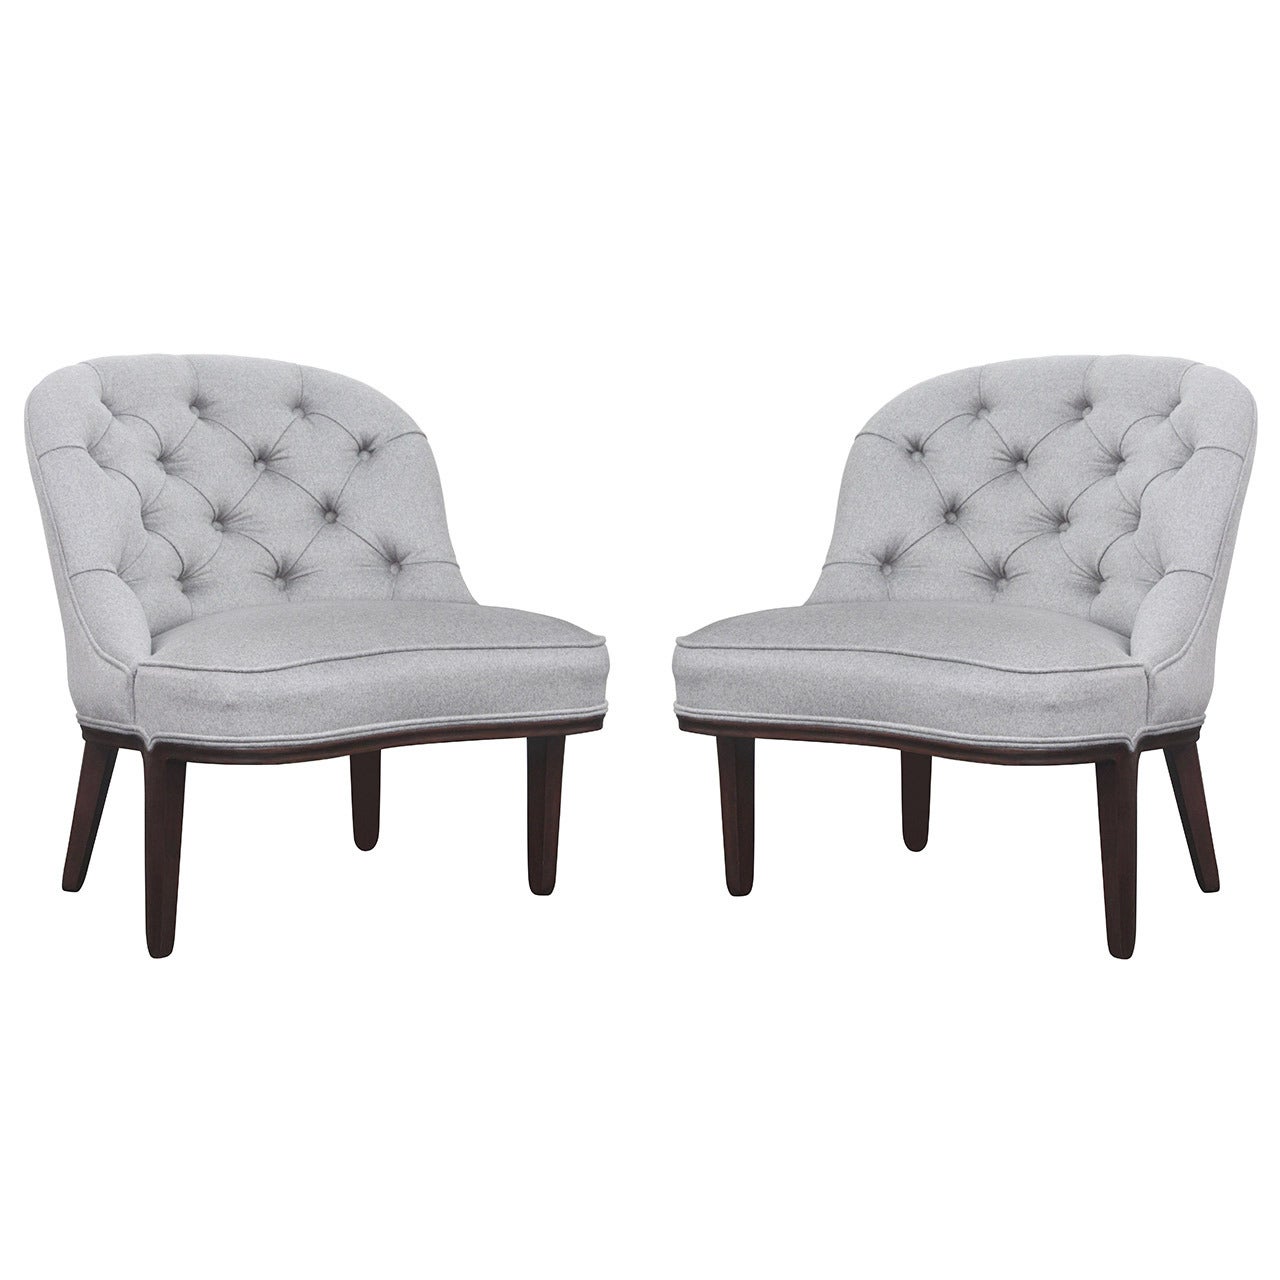 Pair of Tufted-Back Slipper Chairs by Edward Wormley